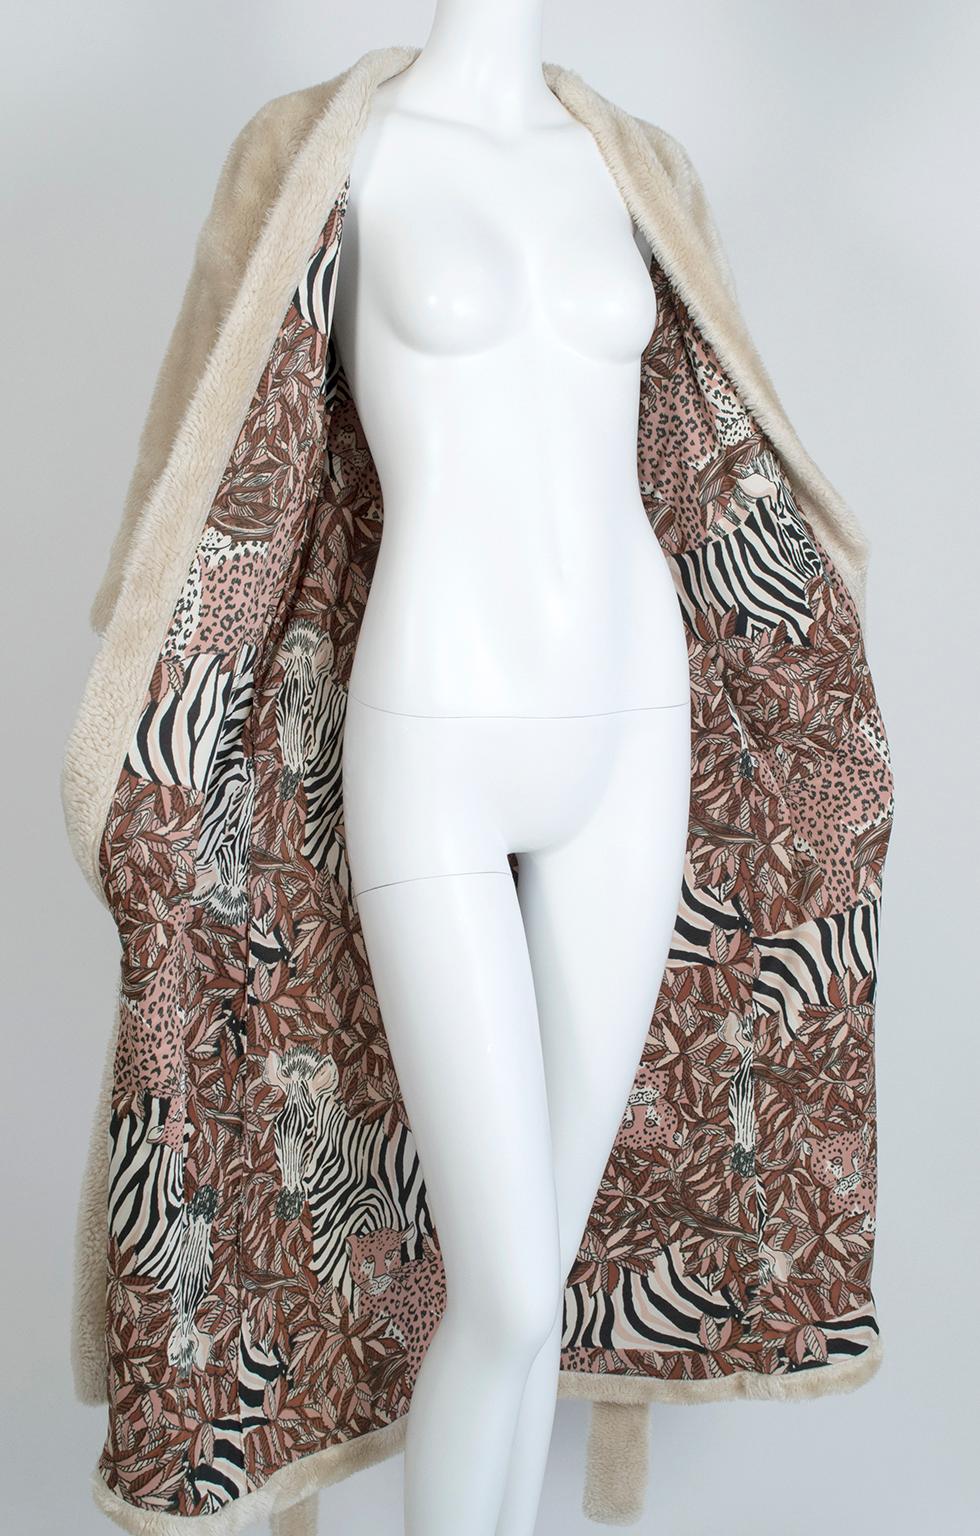 Reversible Ivory Faux Fur Robe w Leonard Paris-Inspired Jungle Lining - M, 1960s For Sale 5